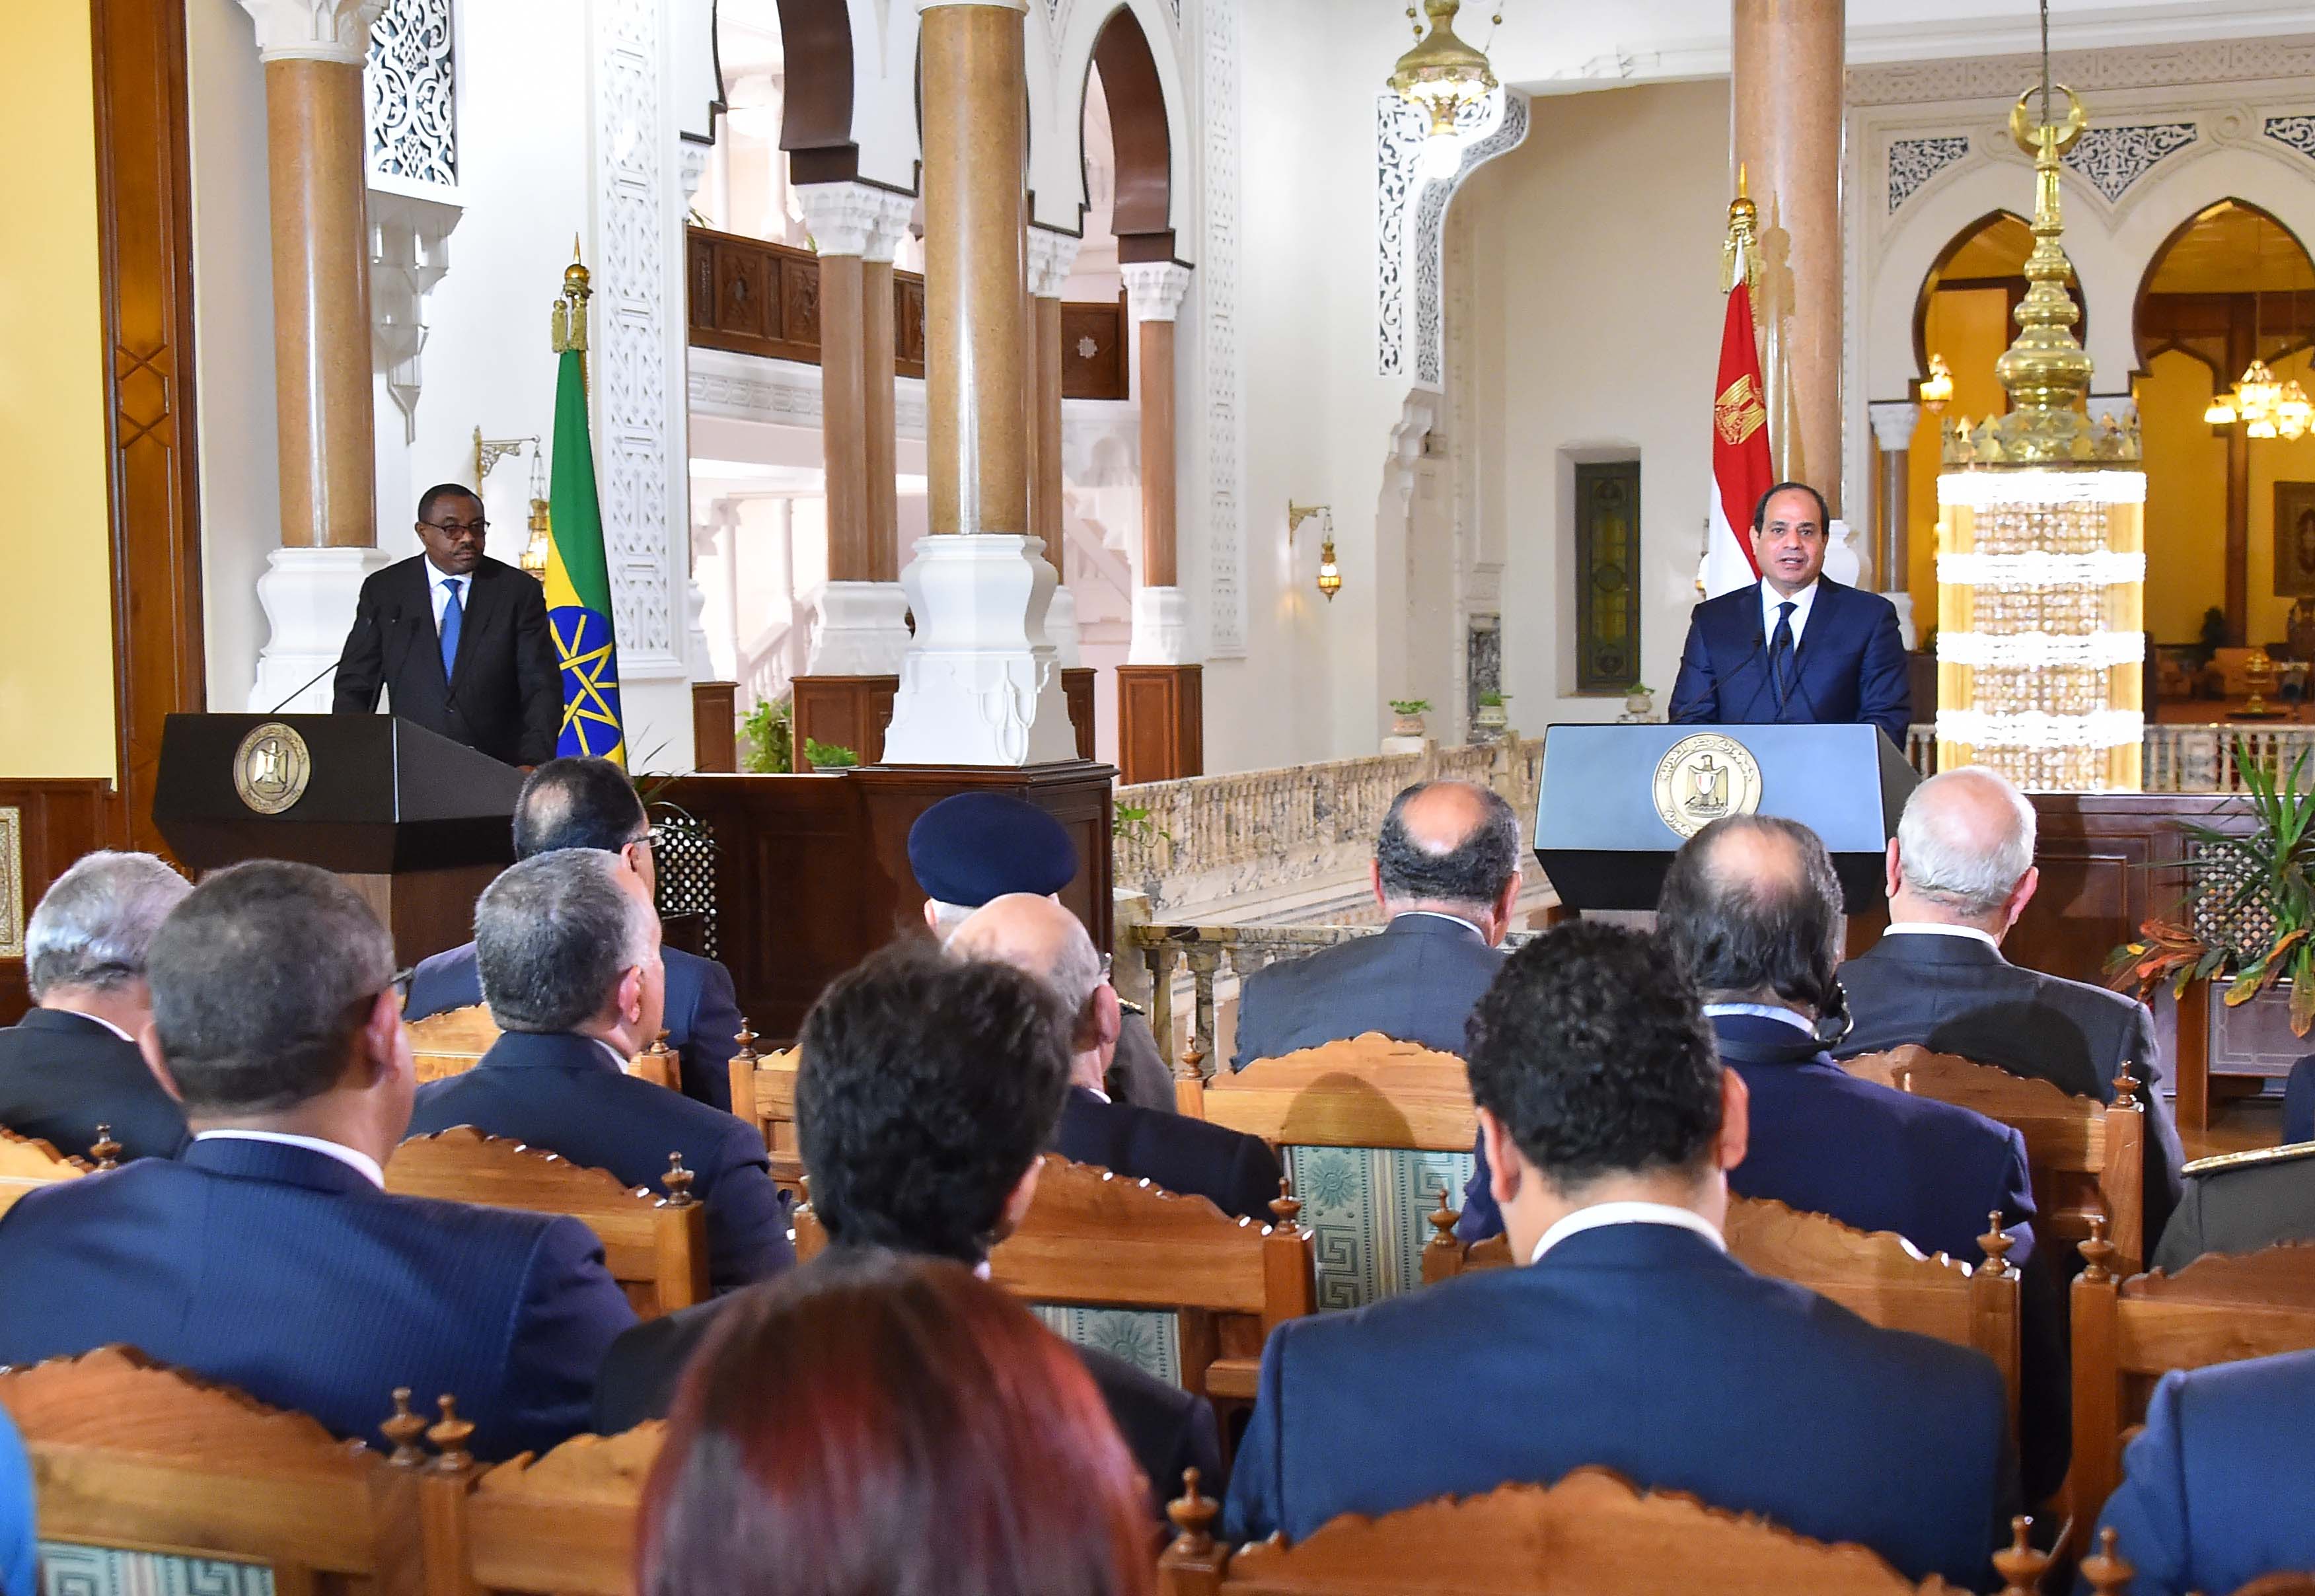 President Abdelfattah Al-Sisi with  Ethiopian Prime Minister Hailemariam Desalegn during the news conference